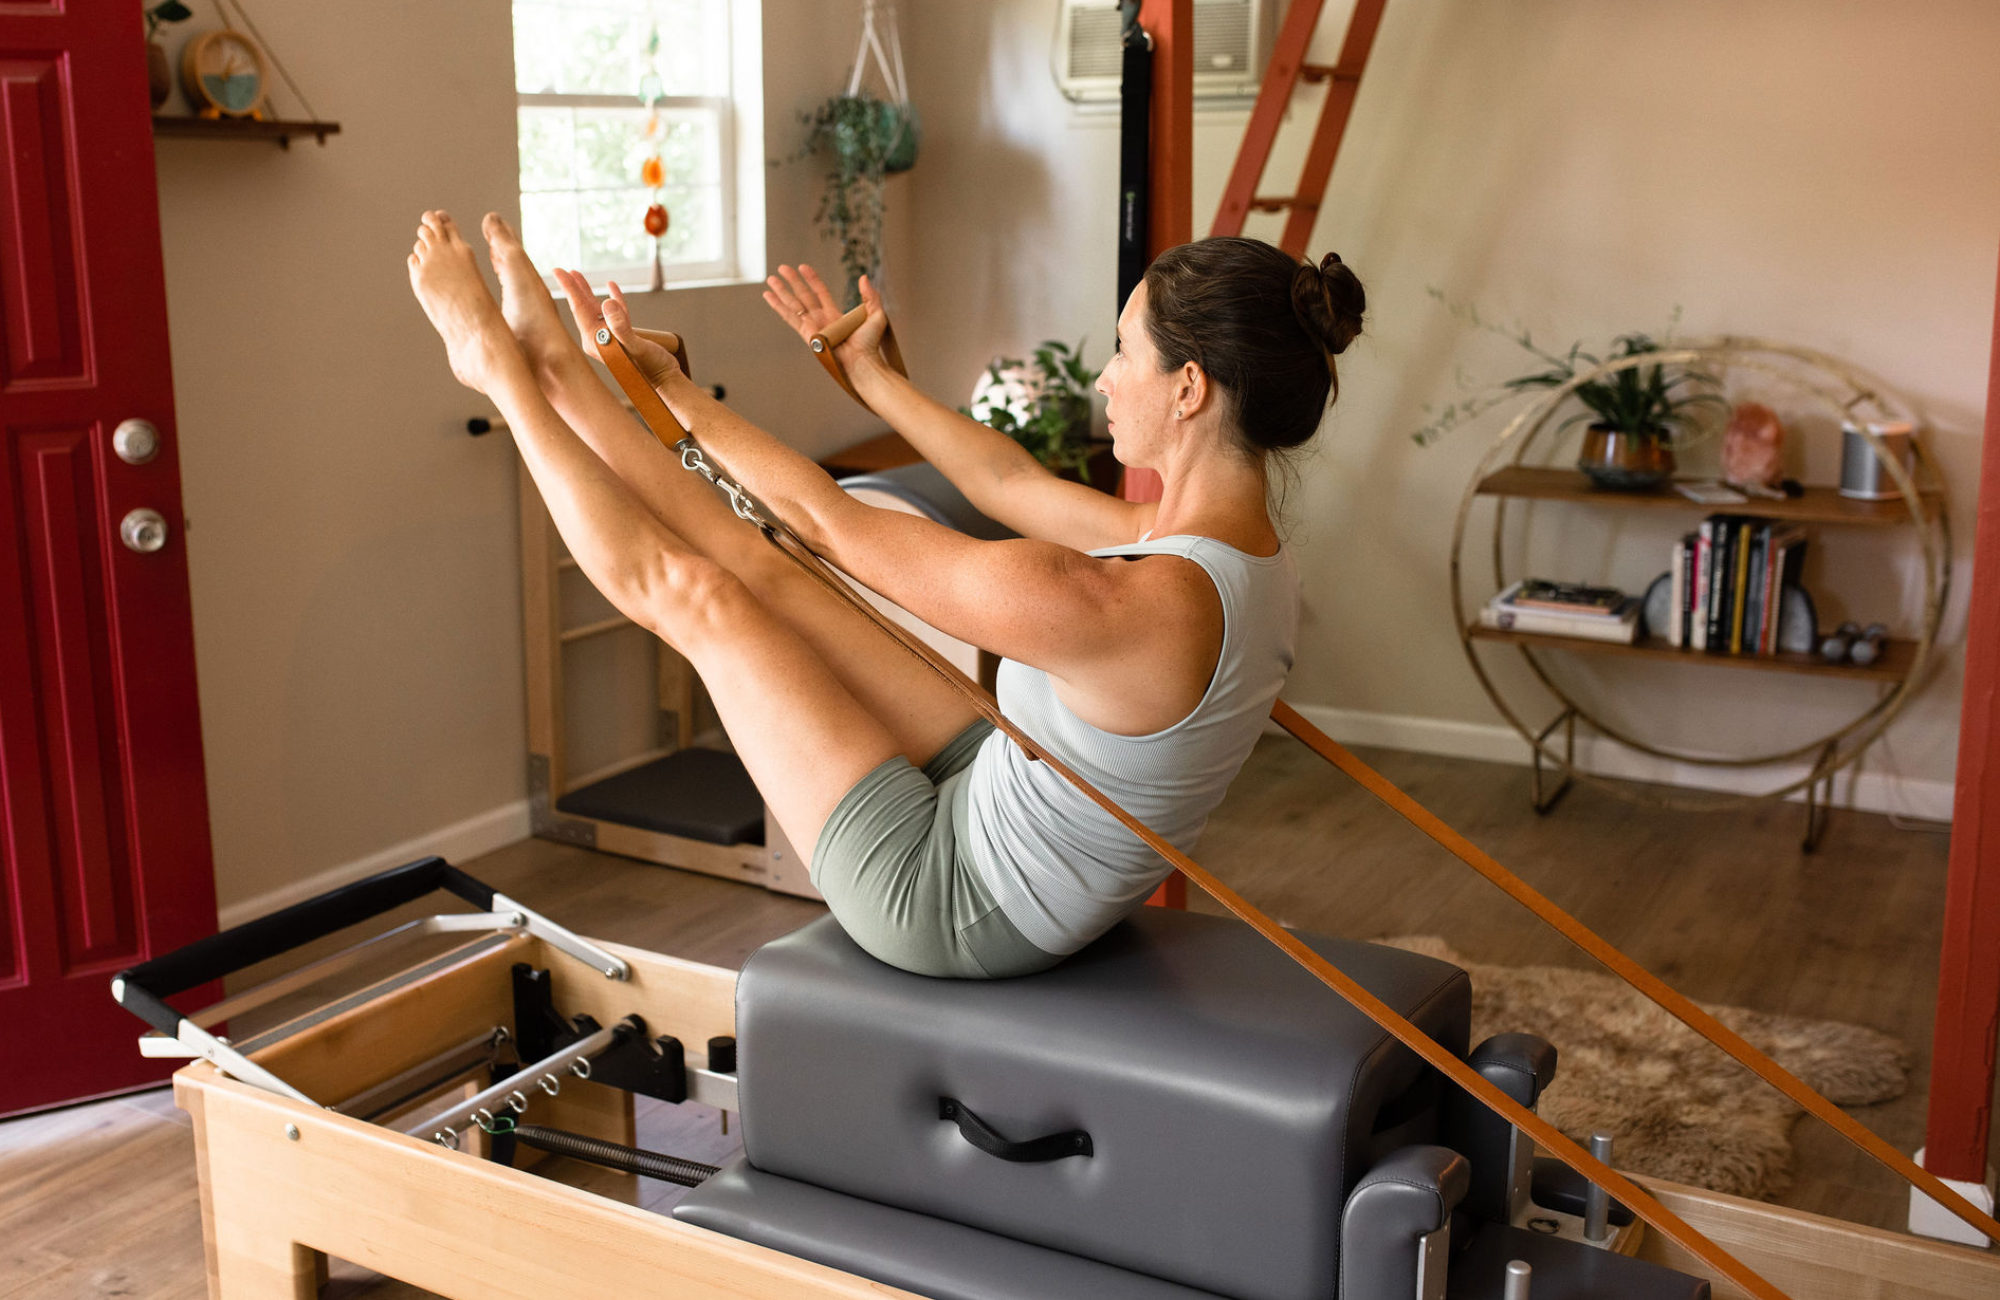 Christmas practicing Pilates exercise Teaser on the Reformer